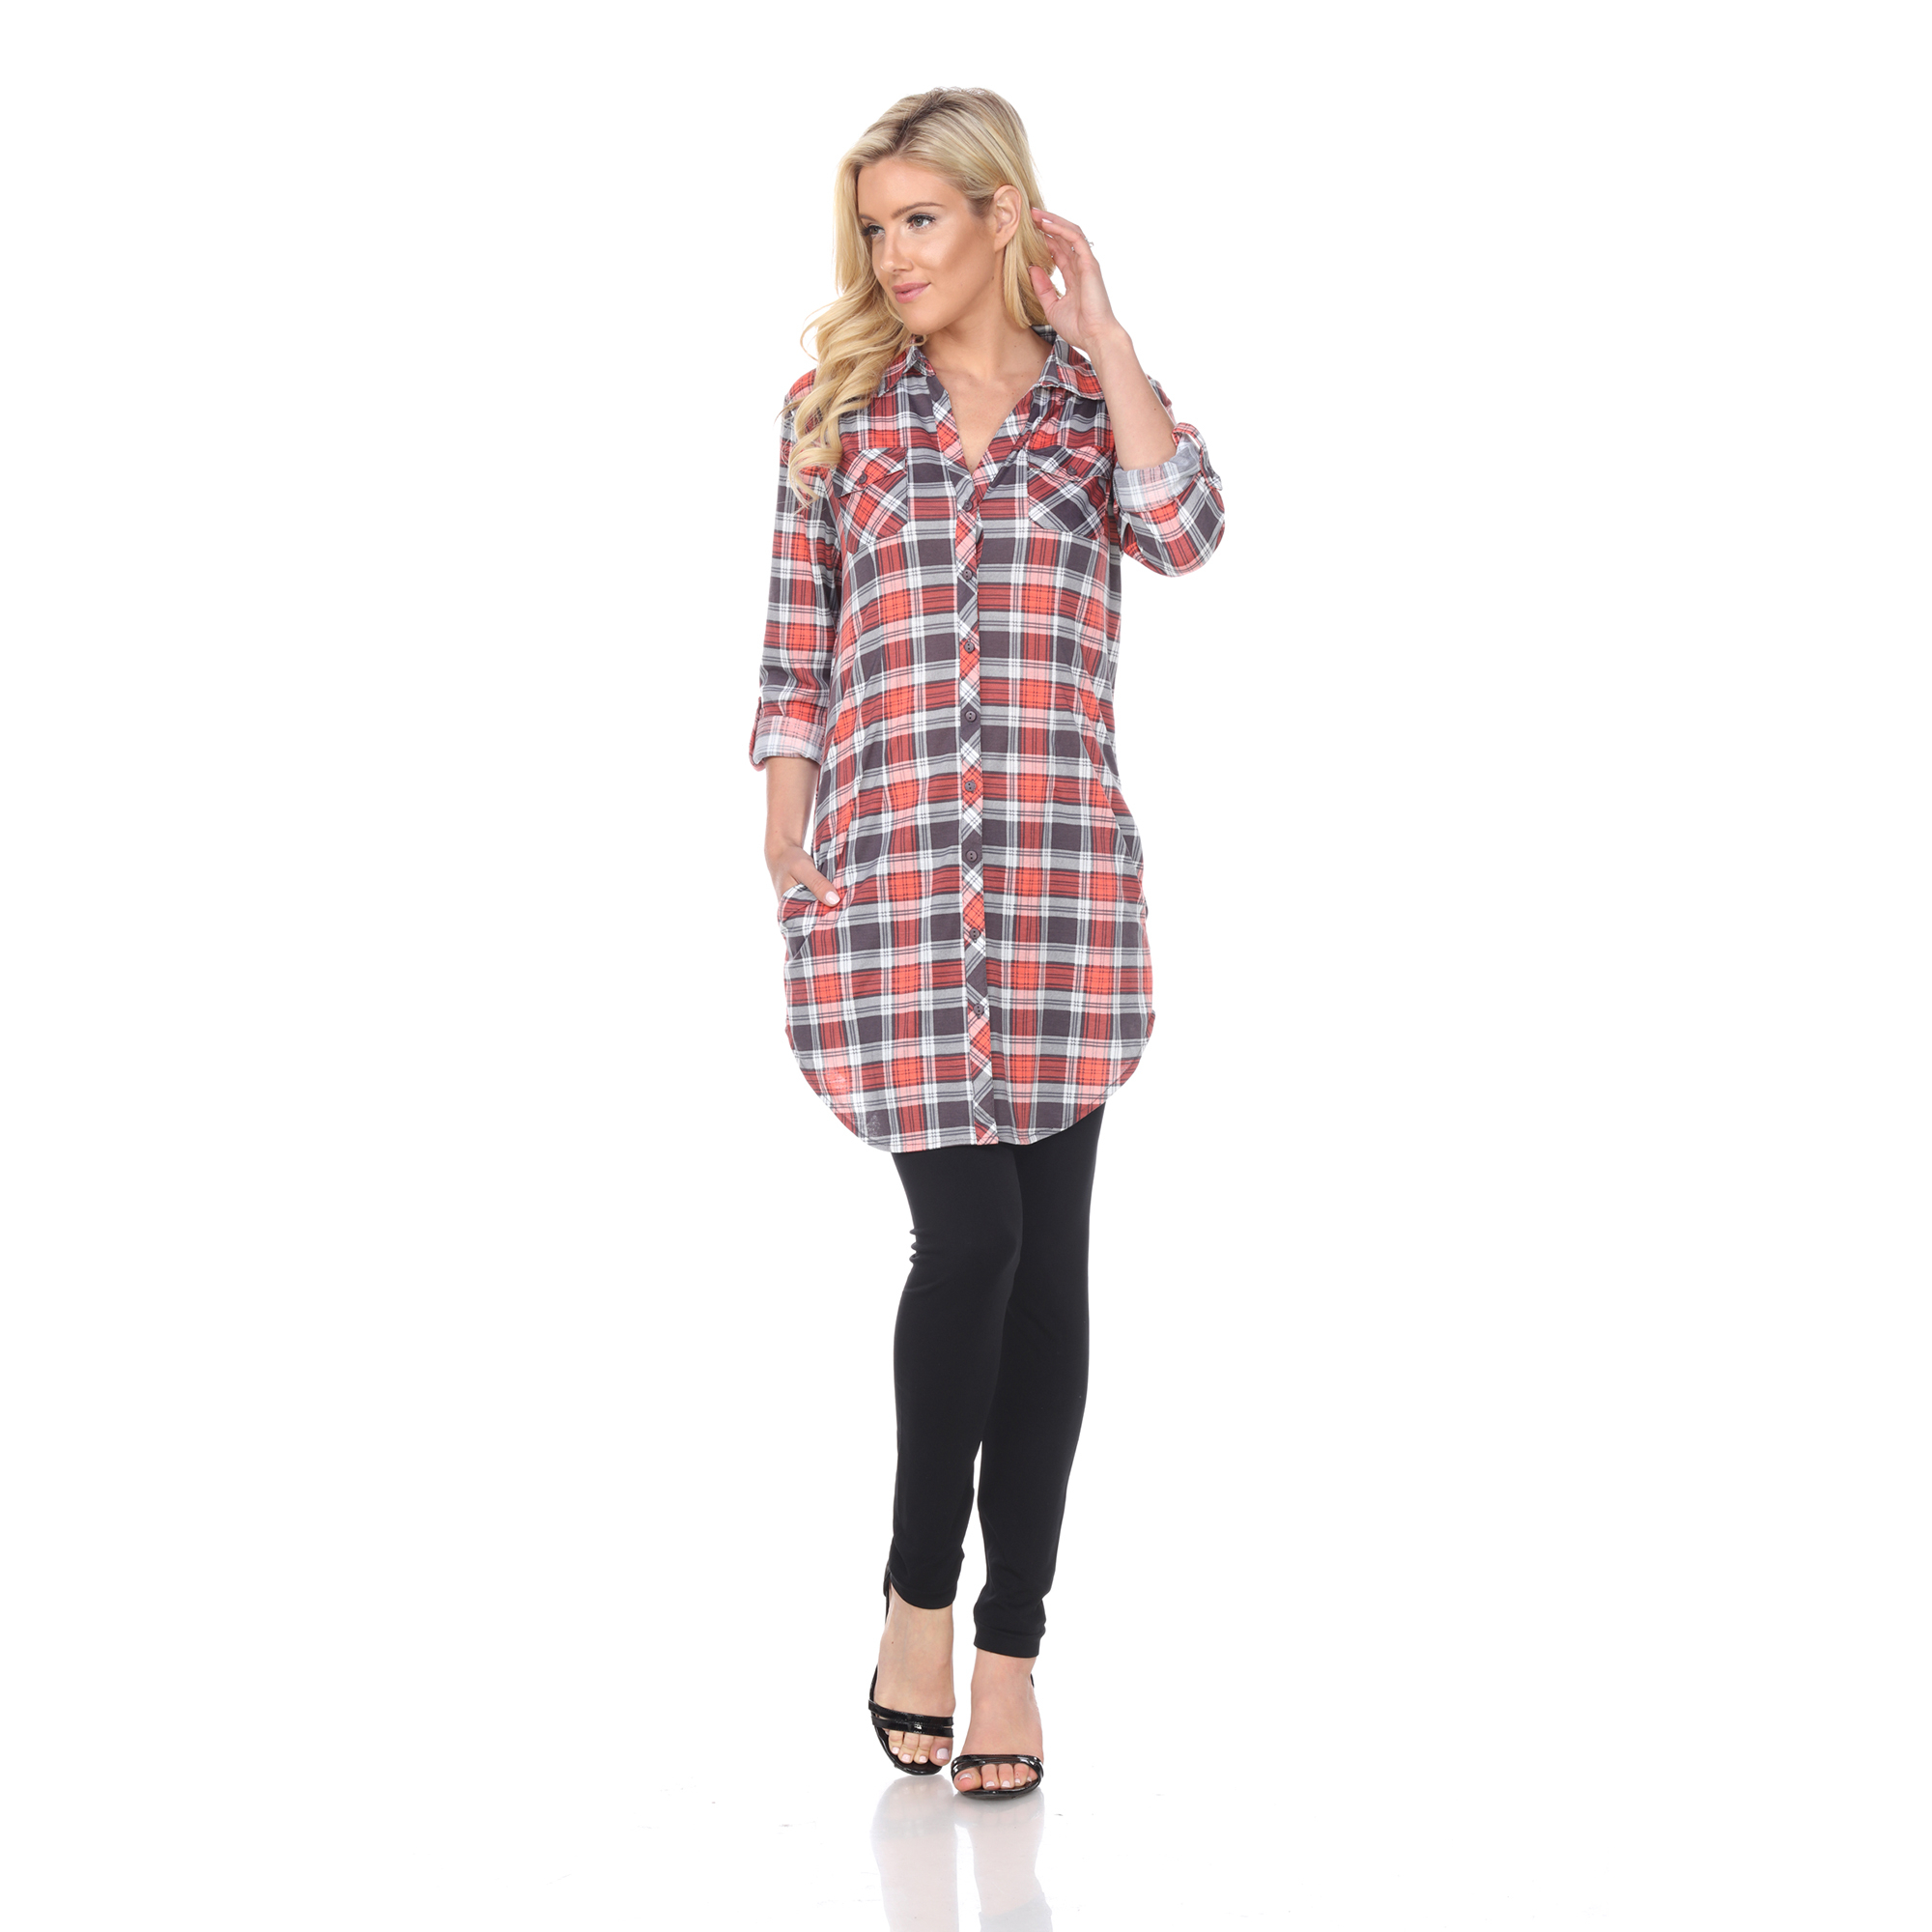 White Mark Women's Stretchy Plaid Flannel Tunic Top - Grey/Coral, Medium